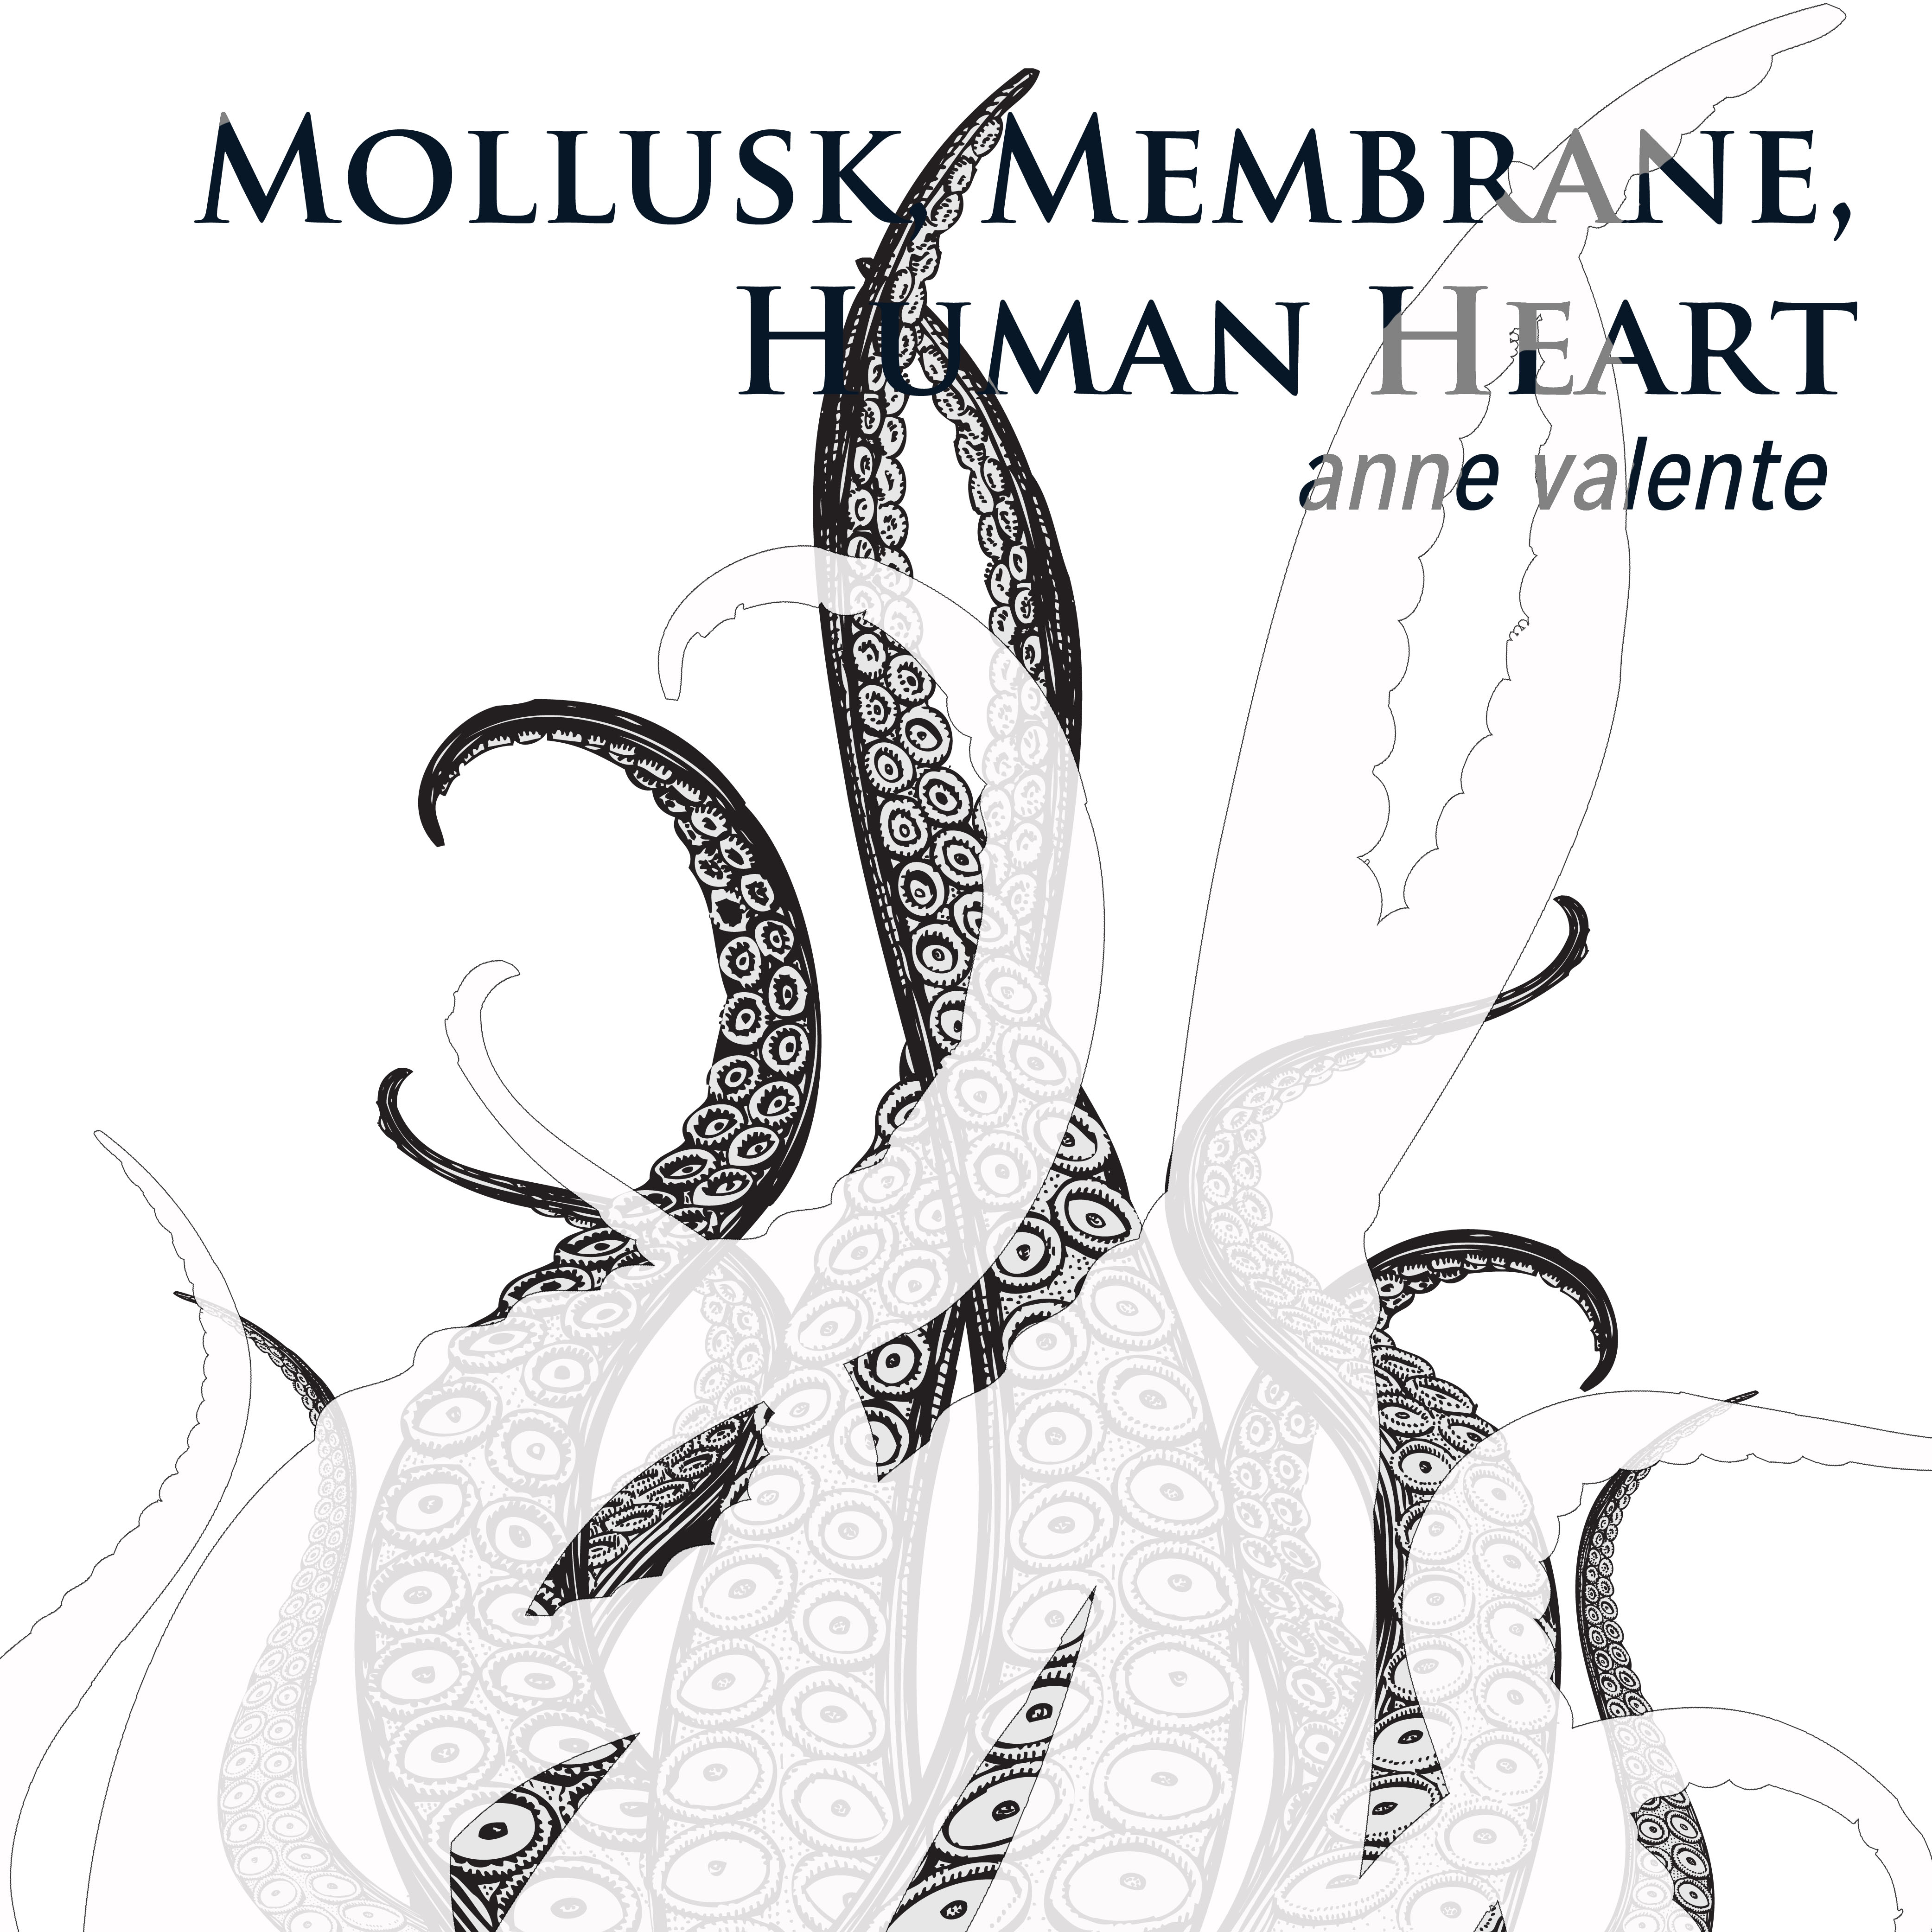 Stories That Teach: “Mollusk, Membrane, Human Heart” by Anne Valente – Discussed by Sadye Teiser